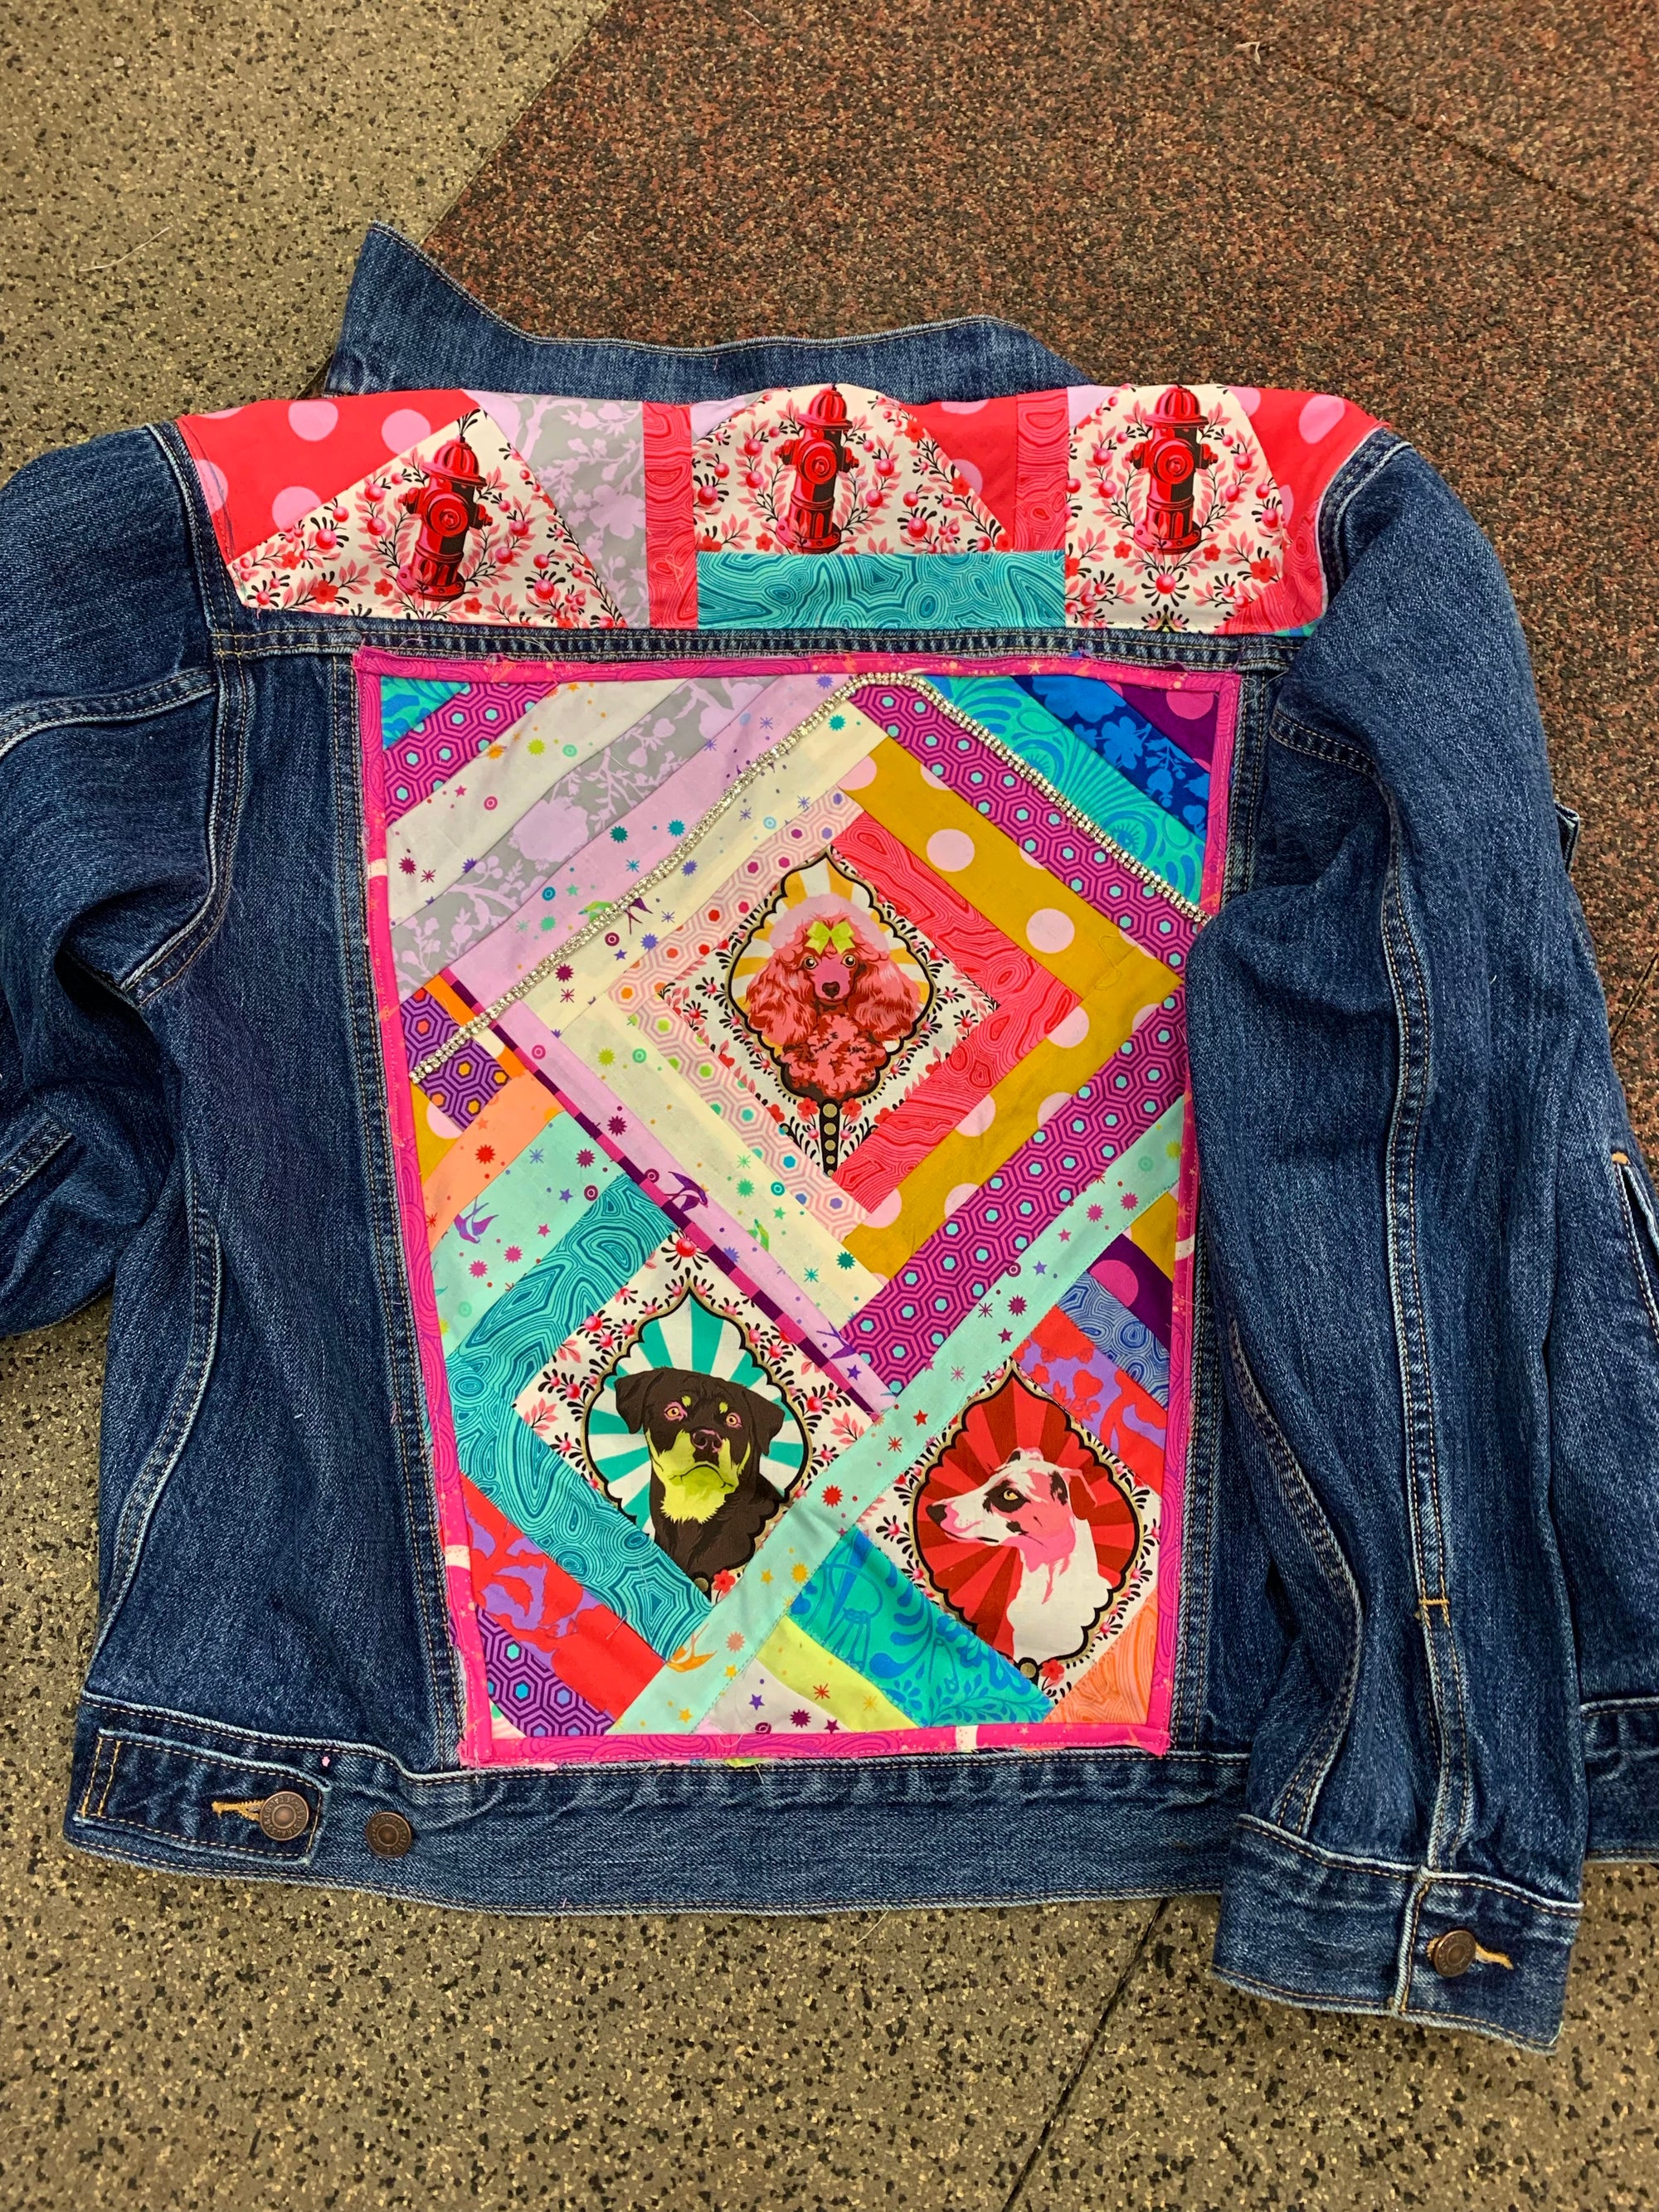 ArtFul Quilted Jean Jacket Class